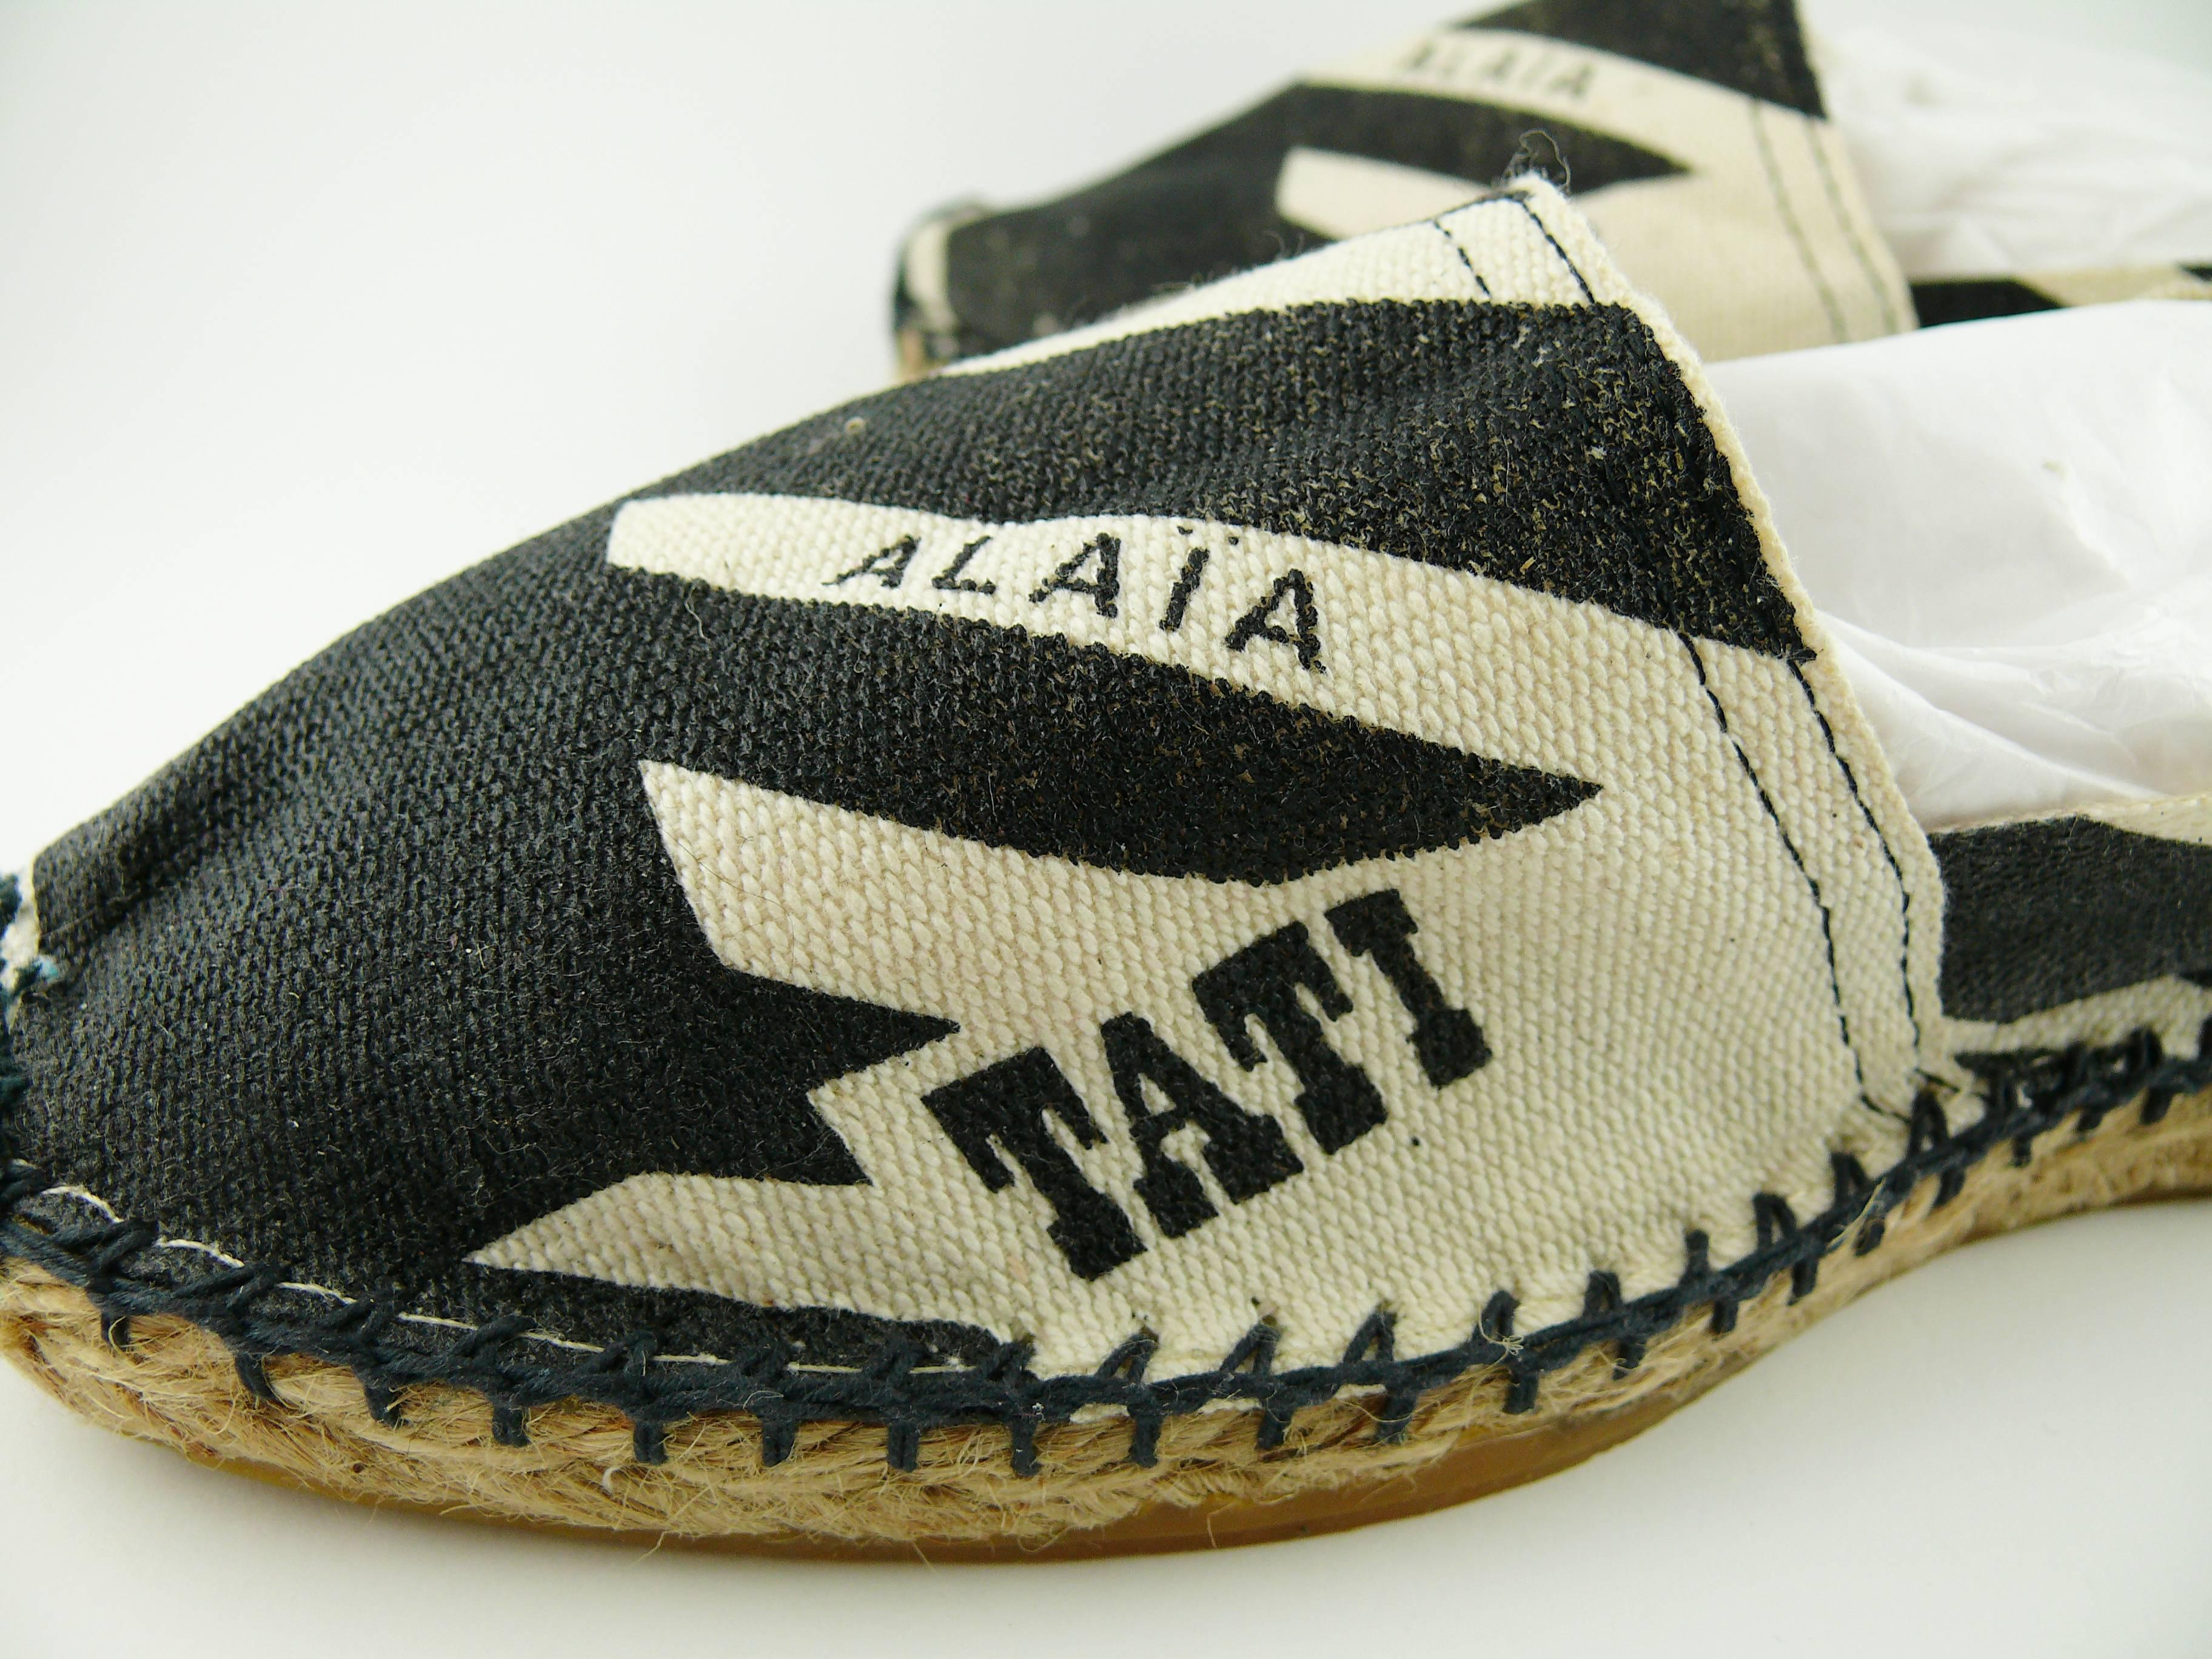 Women's Alaia Vintage Iconic Navy Blue and Off-white Canvas Espadrilles Size 37 (FR)